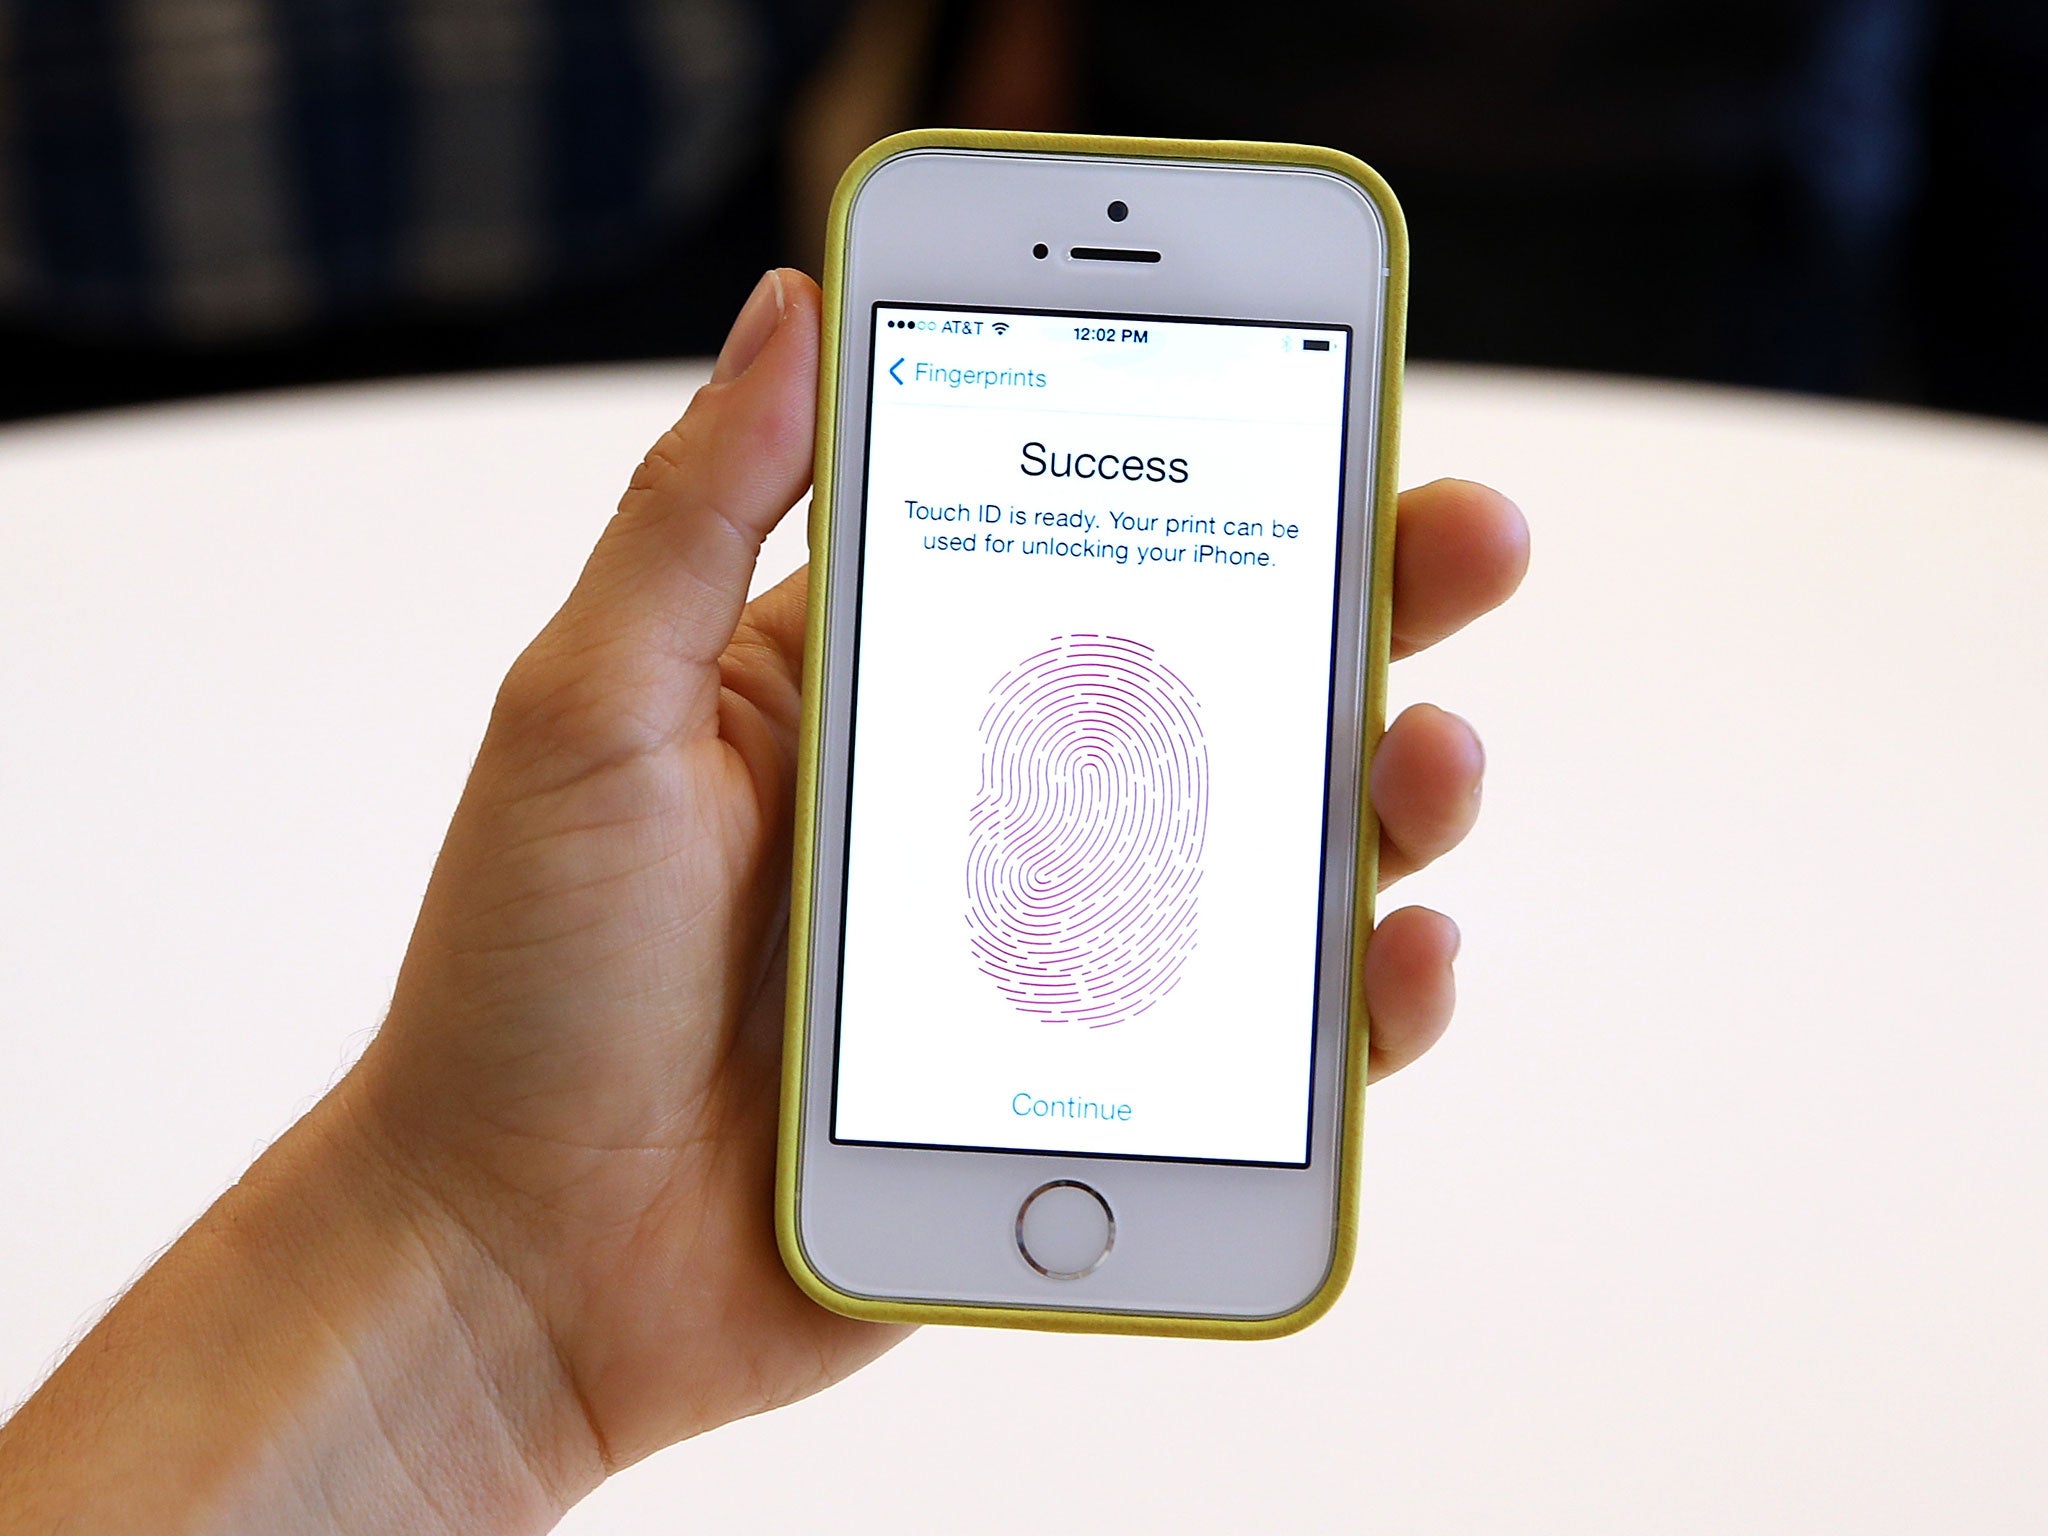 The new iPhone 5S with fingerprint technology.